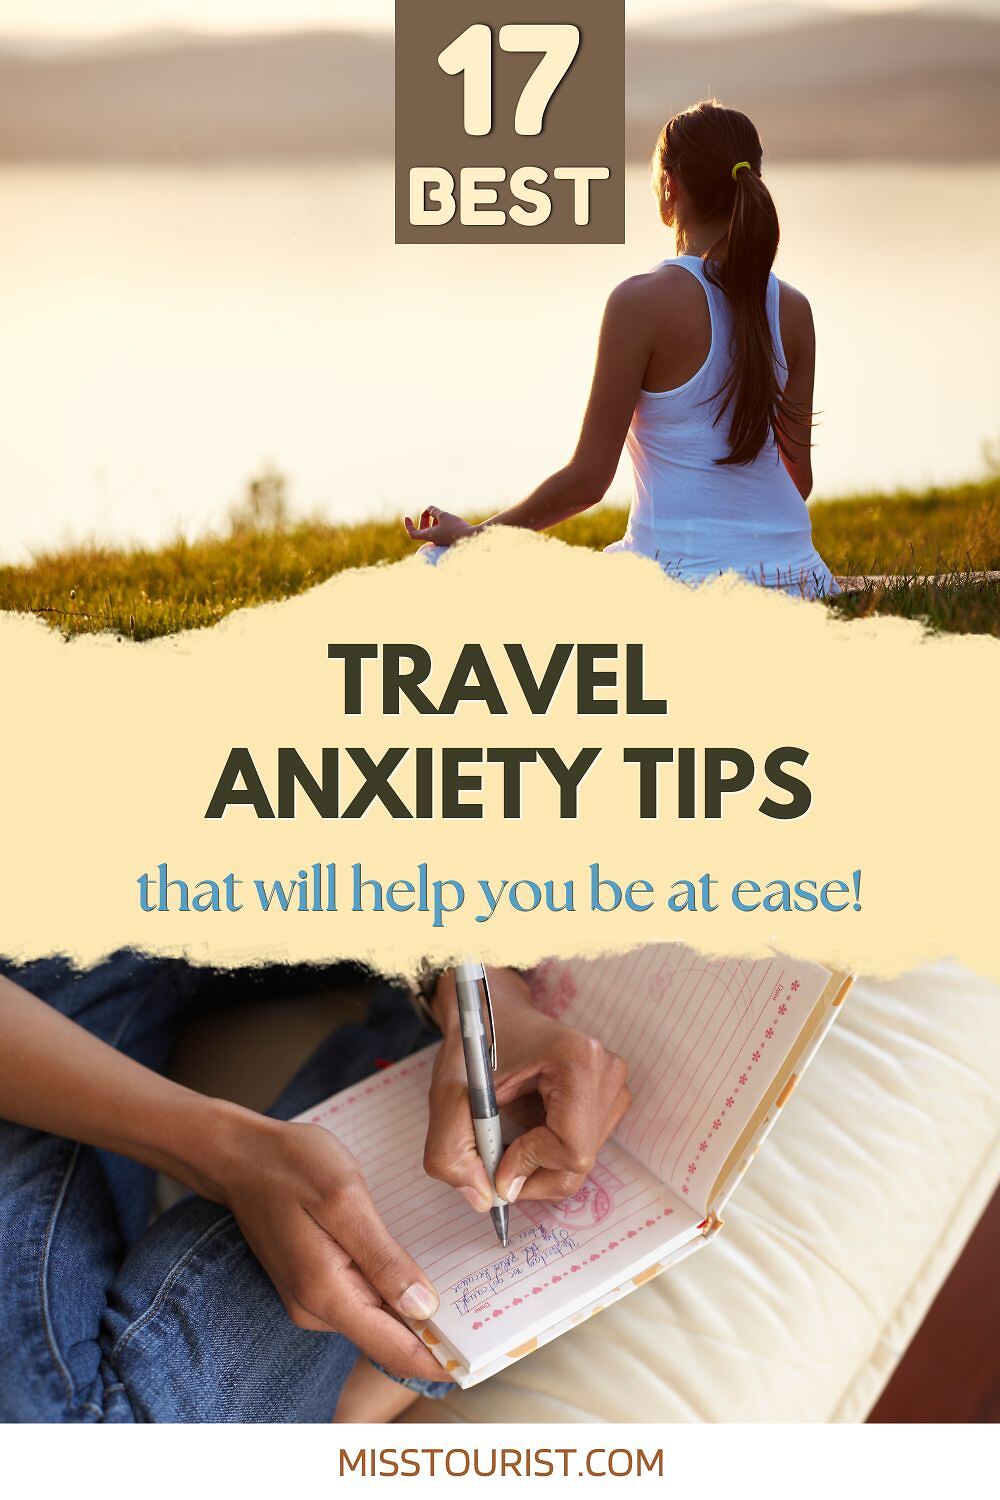 A woman sits by a lake, viewed from behind. Text above her reads, "17 Best Travel Anxiety Tips that will help you be at ease!" Below is a hand writing in a notebook. Website: misstourist.com.